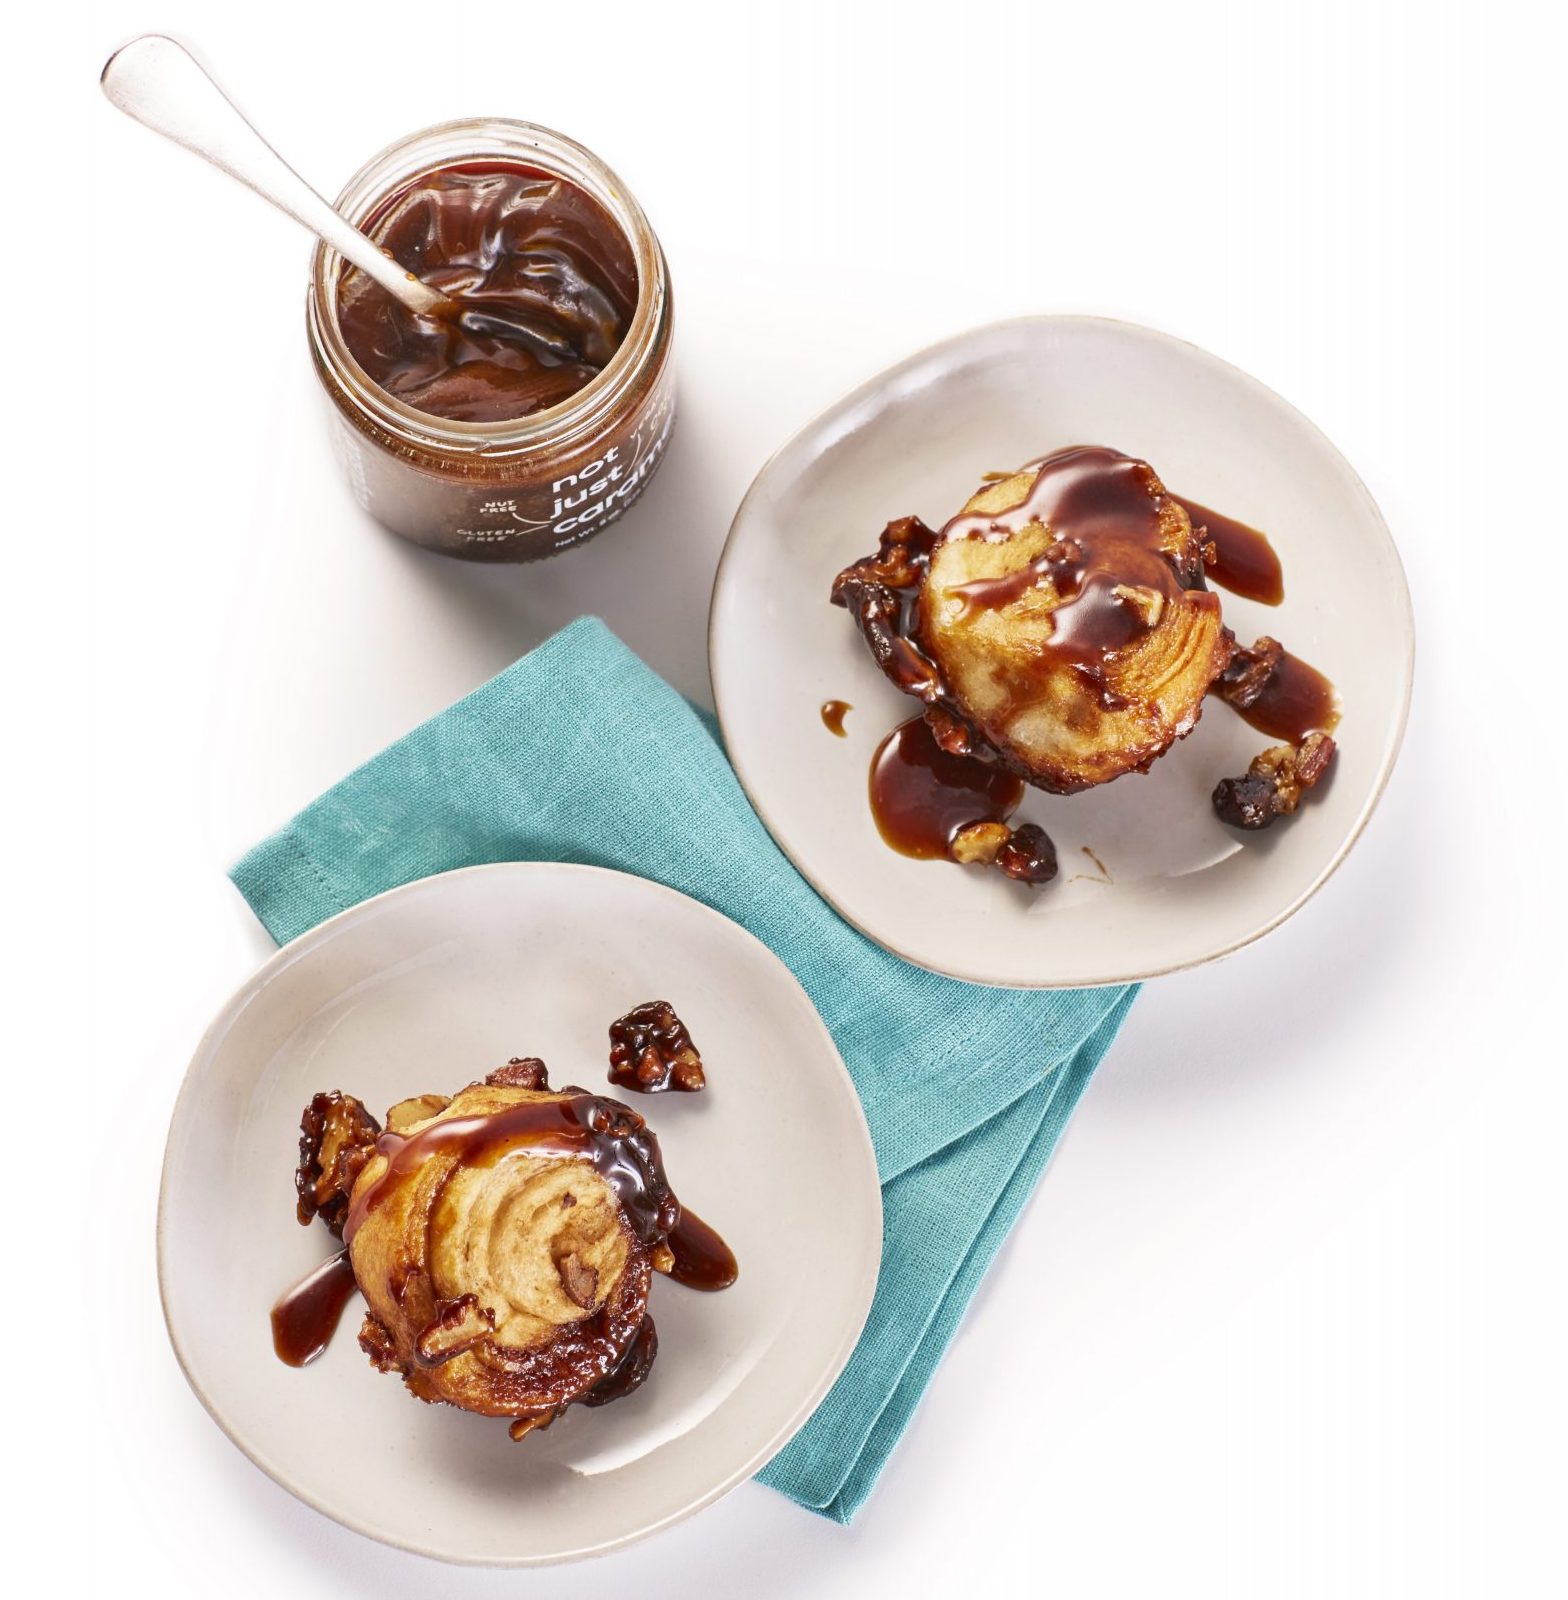 caramel pull-apart bread on a blue napkin with a jar of not just caramel